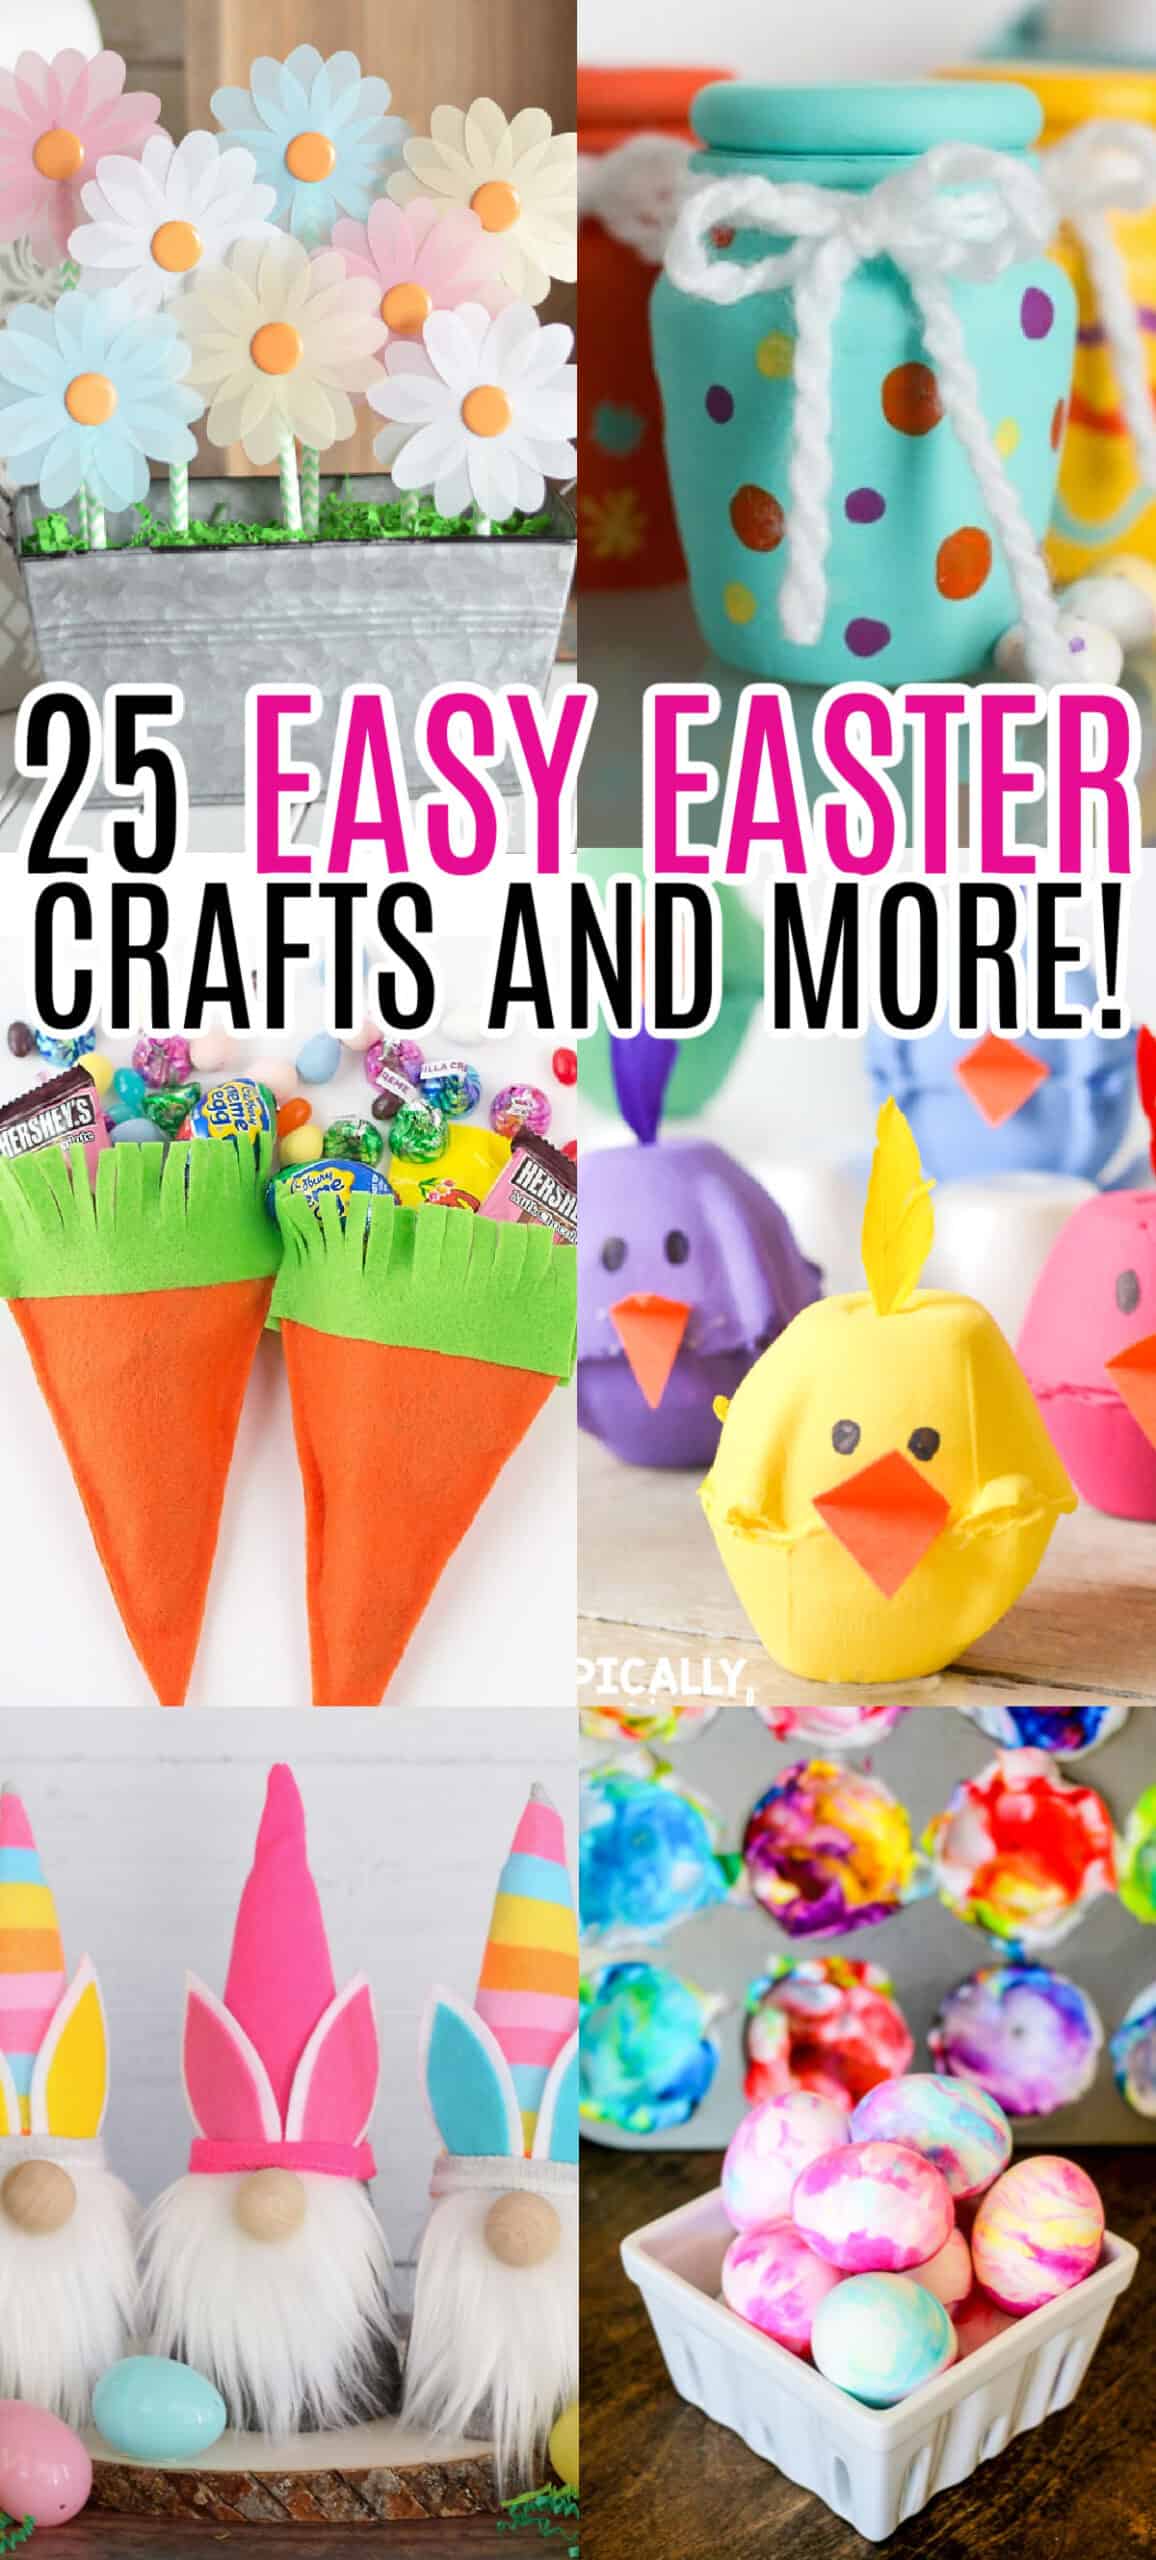 Scratch Off Easter Egg Paper Craft - Made with HAPPY